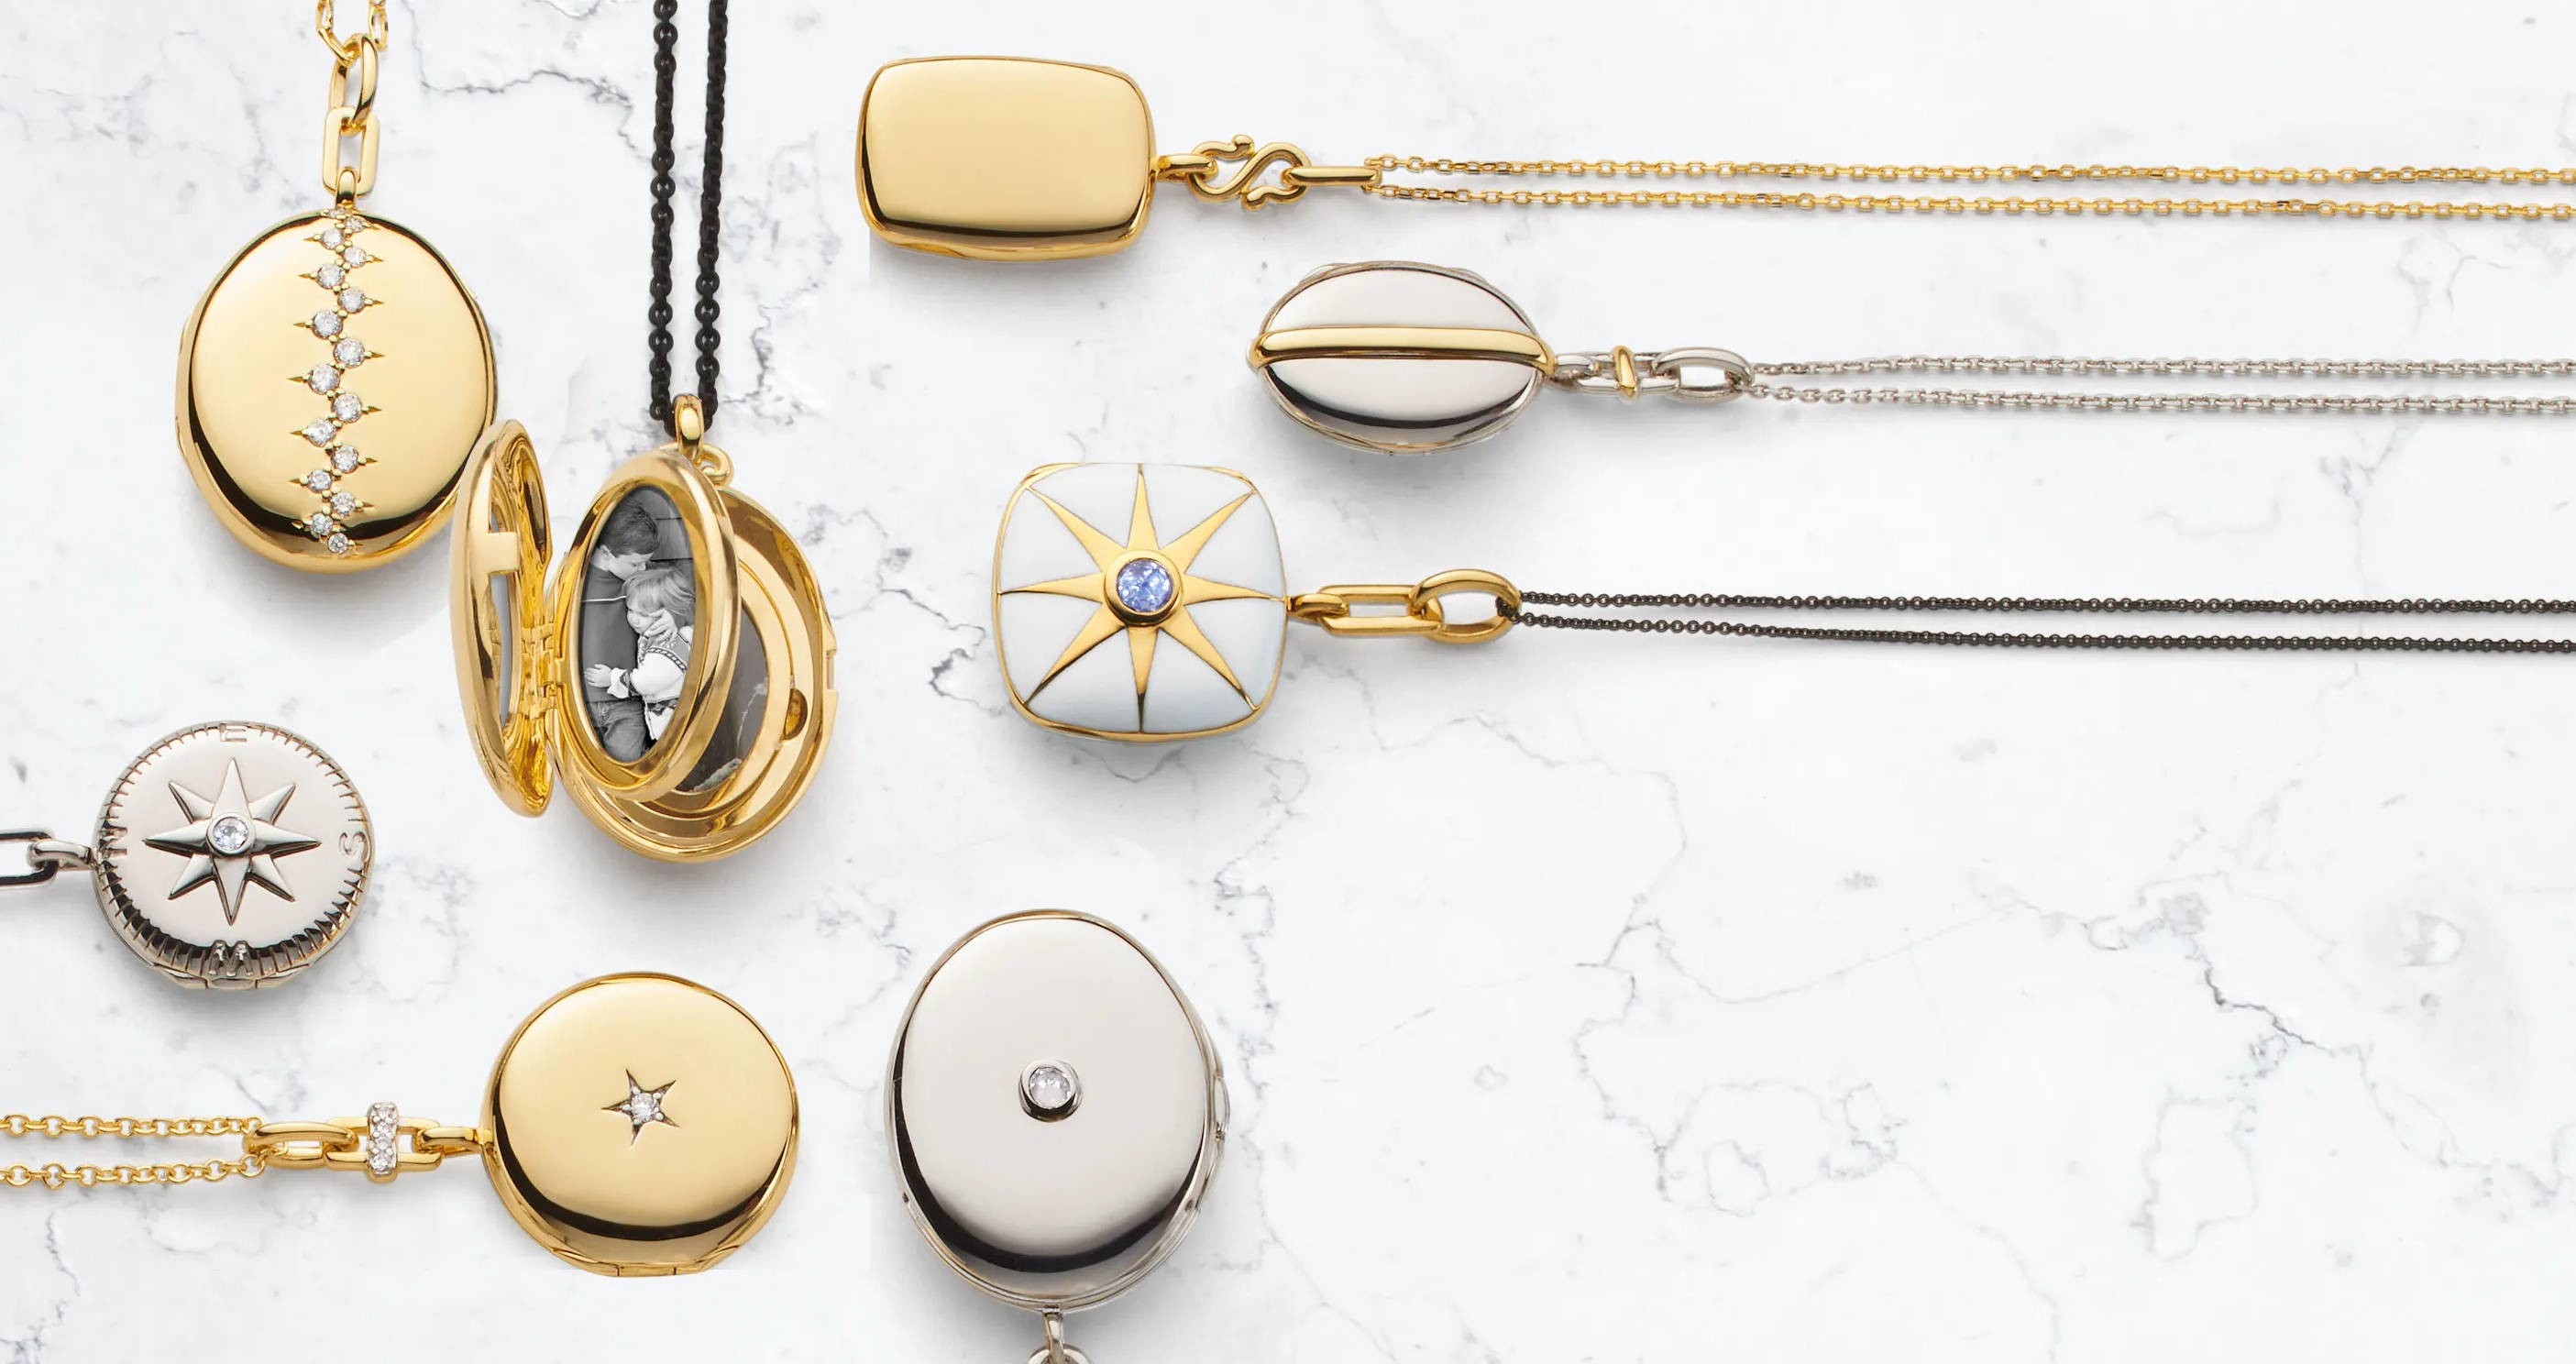 10 things to put in your locket